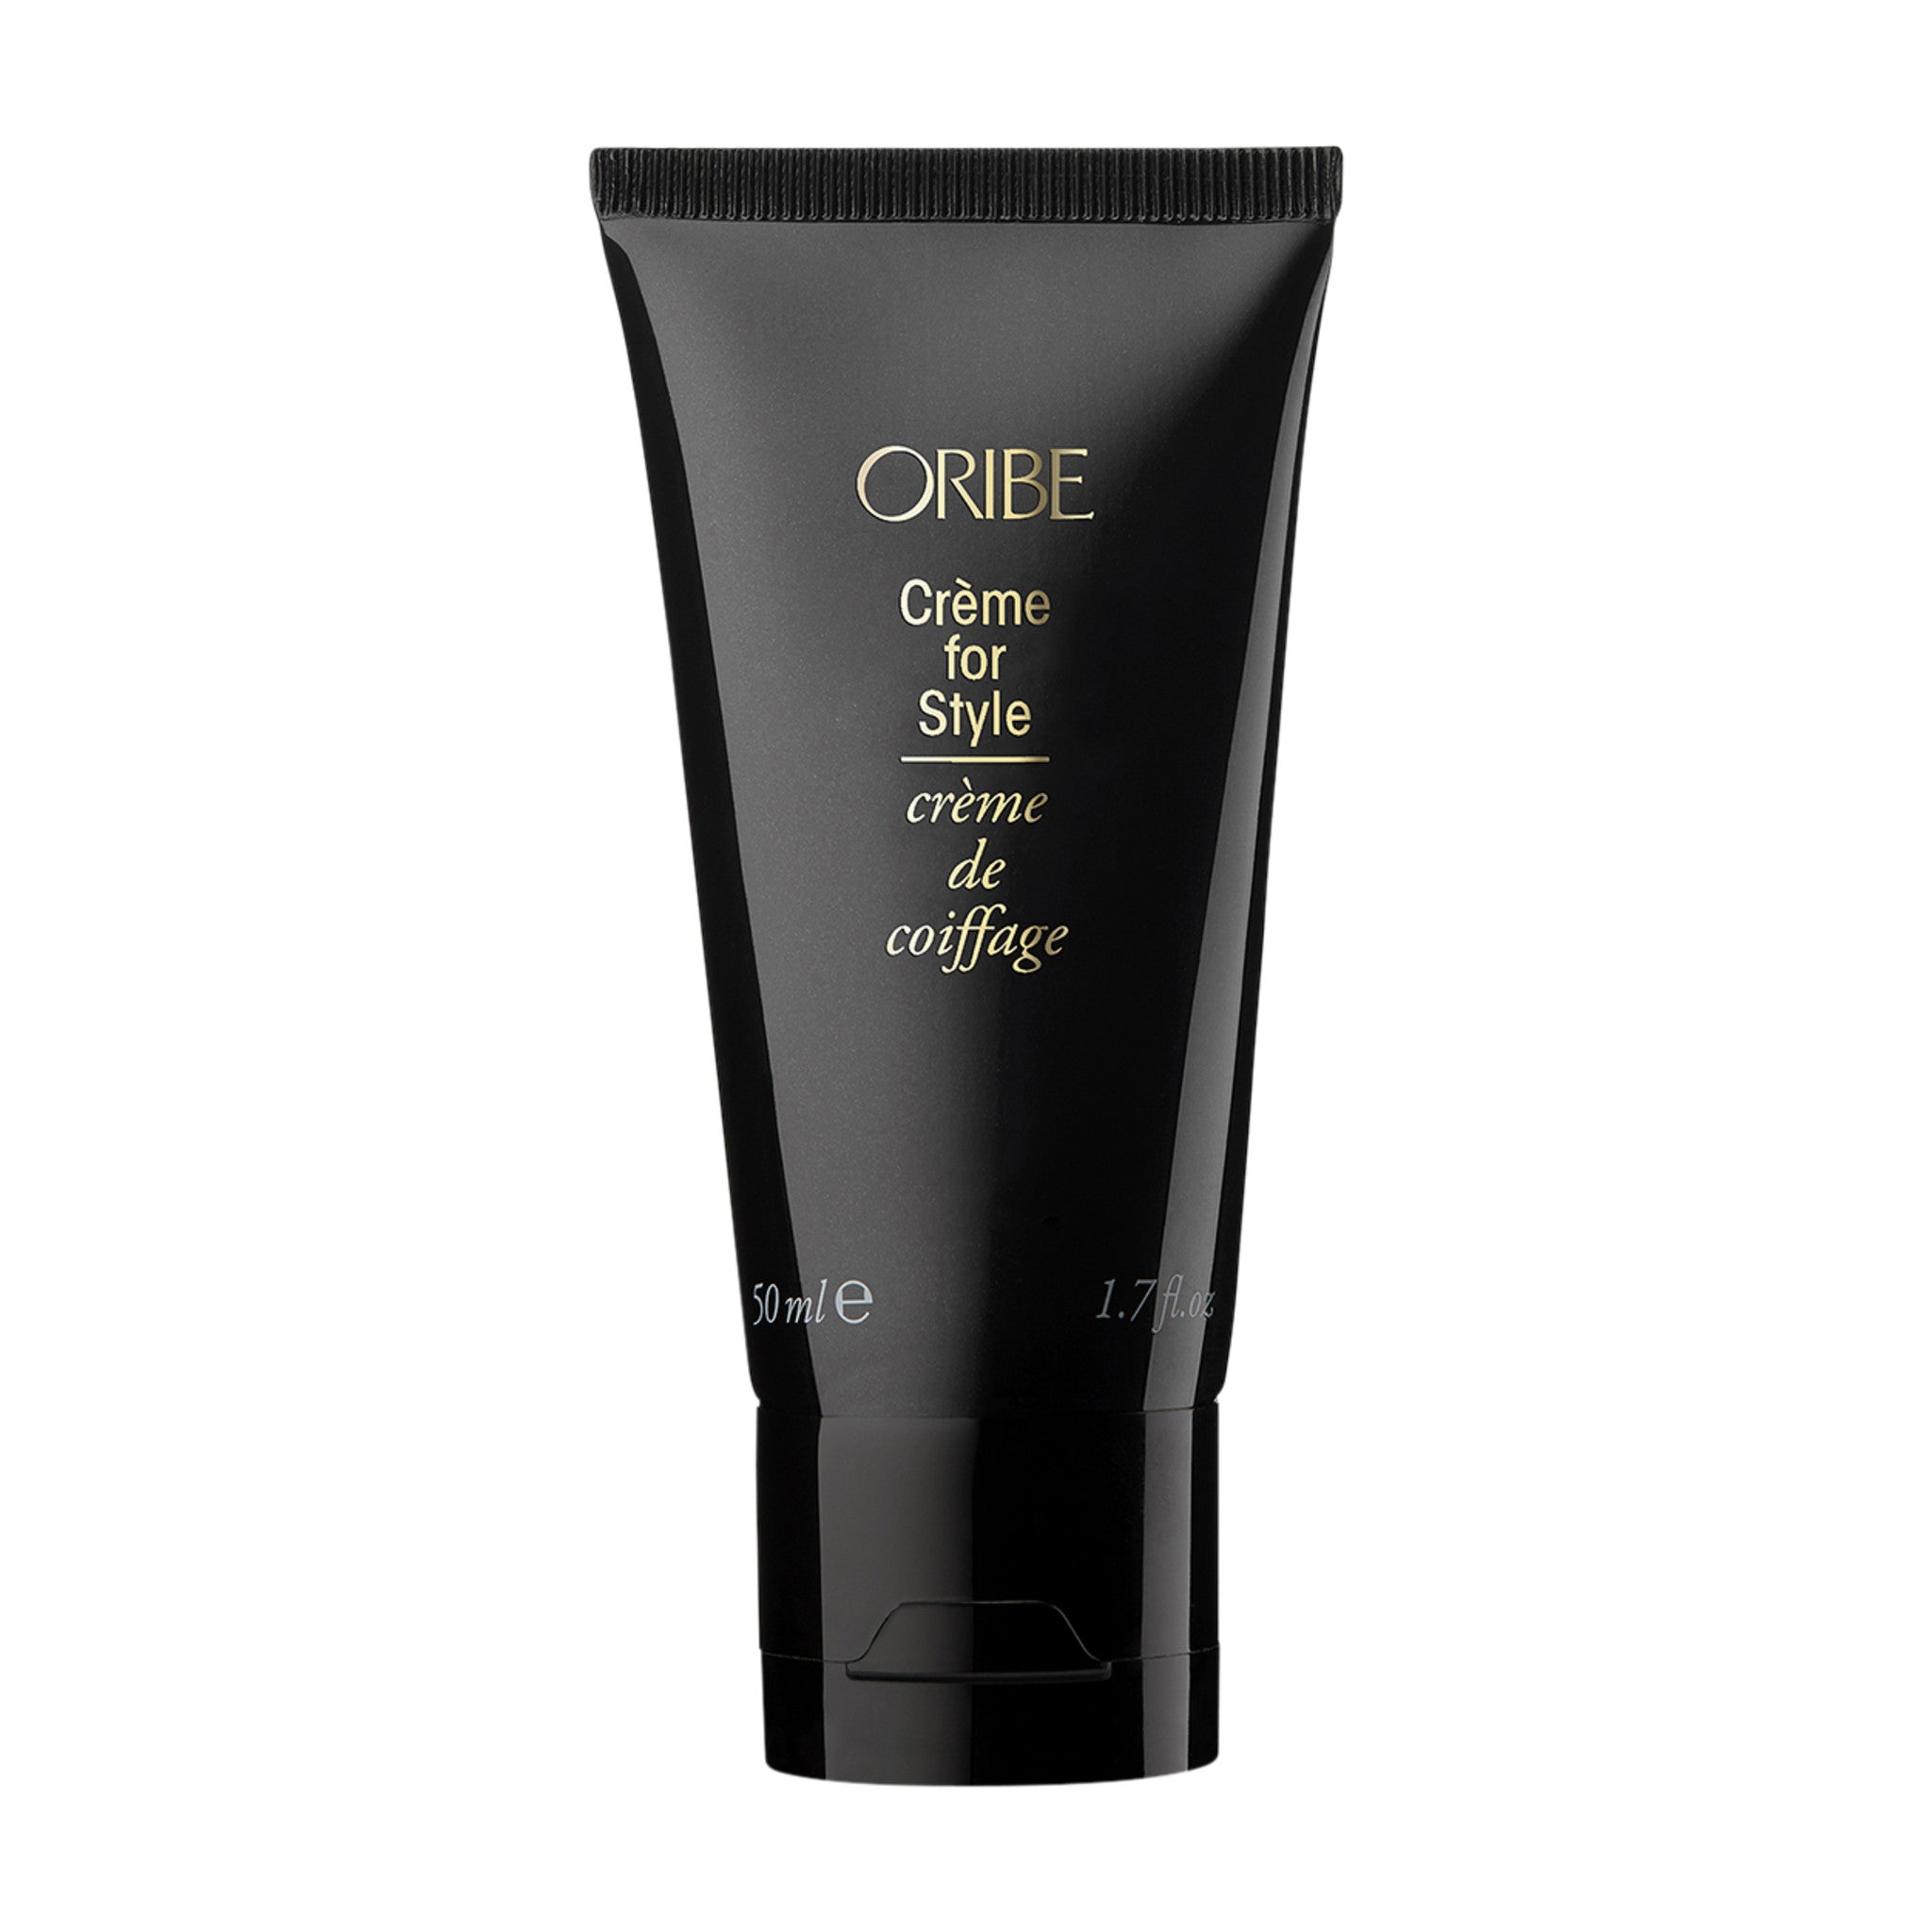 Oribe Crème For Style Size variant: 1.7 oz | 50 ml main image.